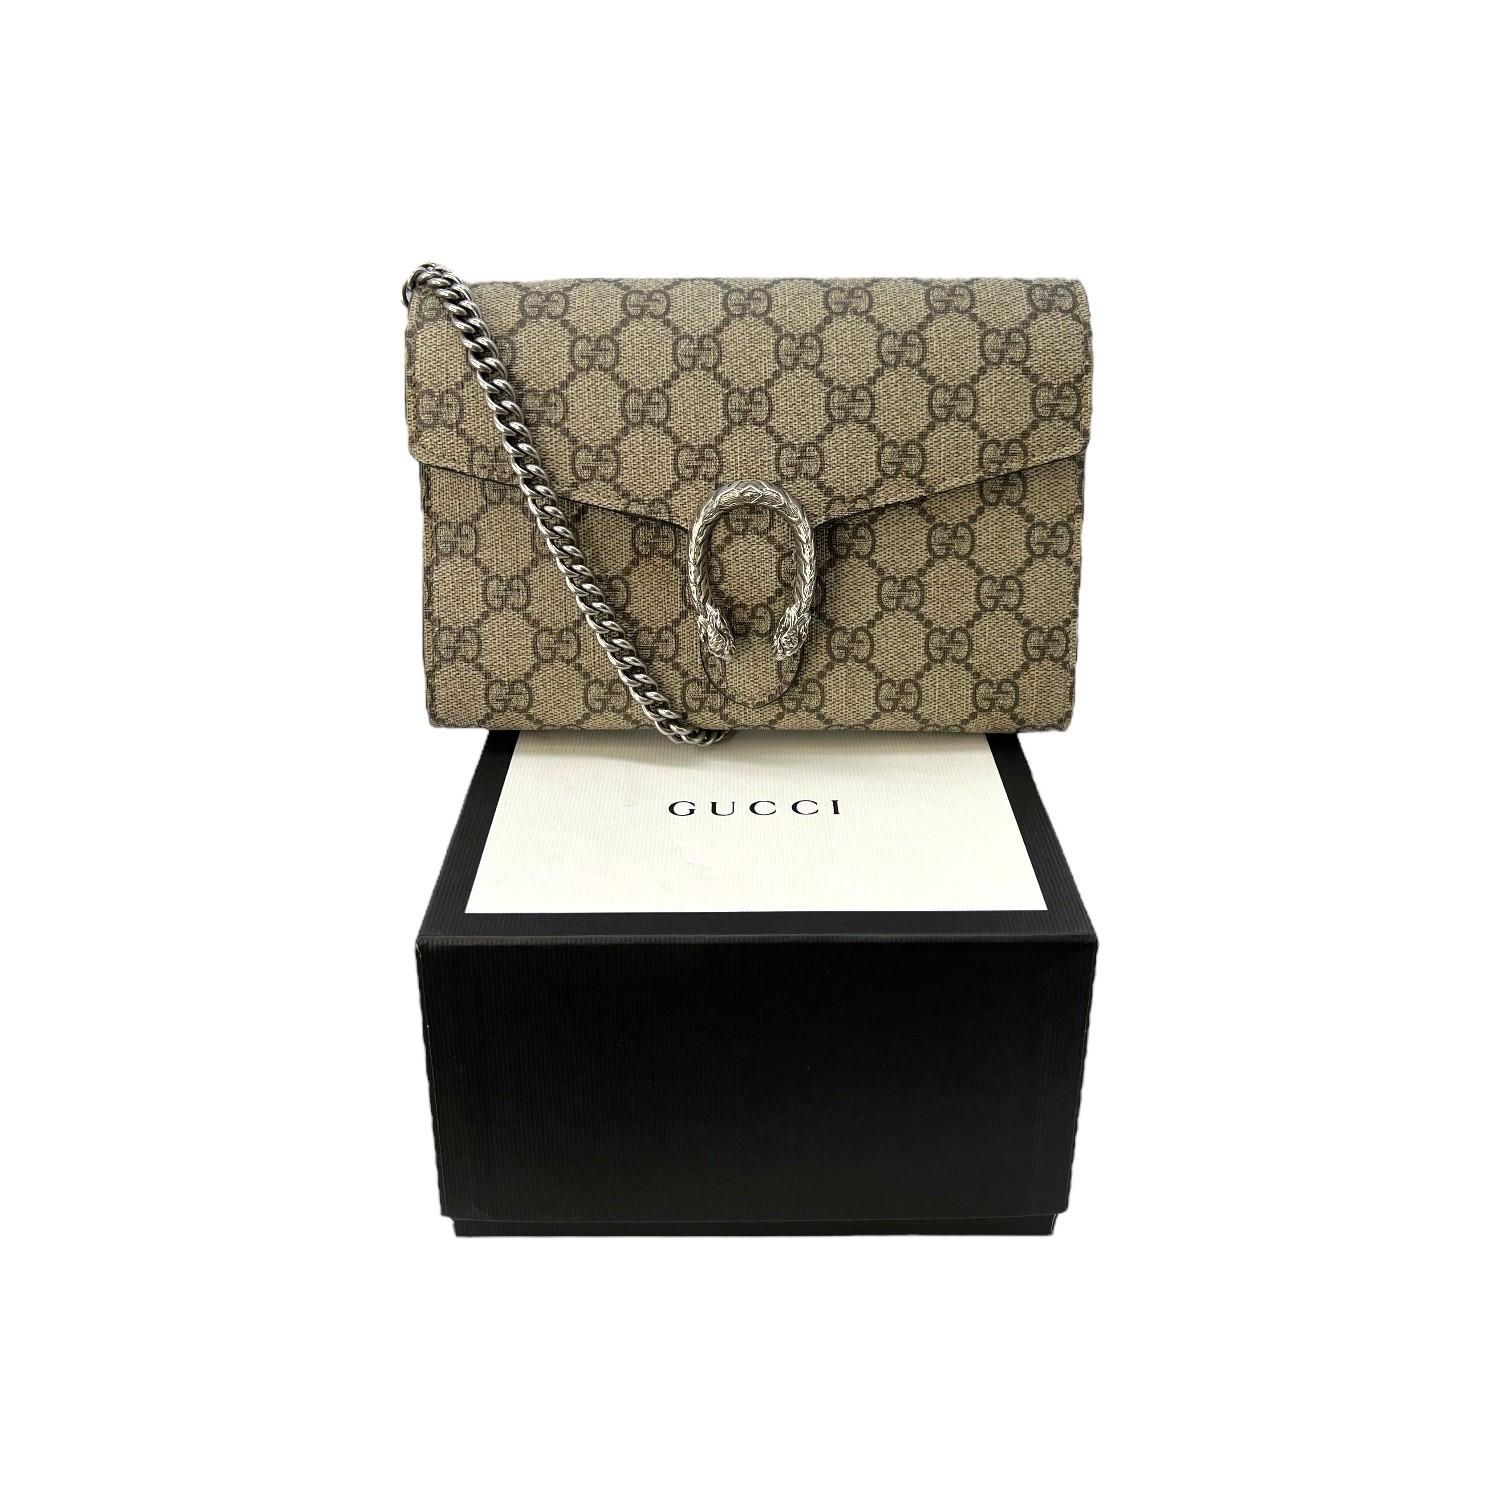 This Gucci GG Supreme Mini Dionysus Chain Wallet was made in Italy and it is finely crafted of Gucci's iconic GG supreme canvas exterior with gunmetal-tone hardware features. It has a removeable chain-link shoulder strap. It has a fold over snap